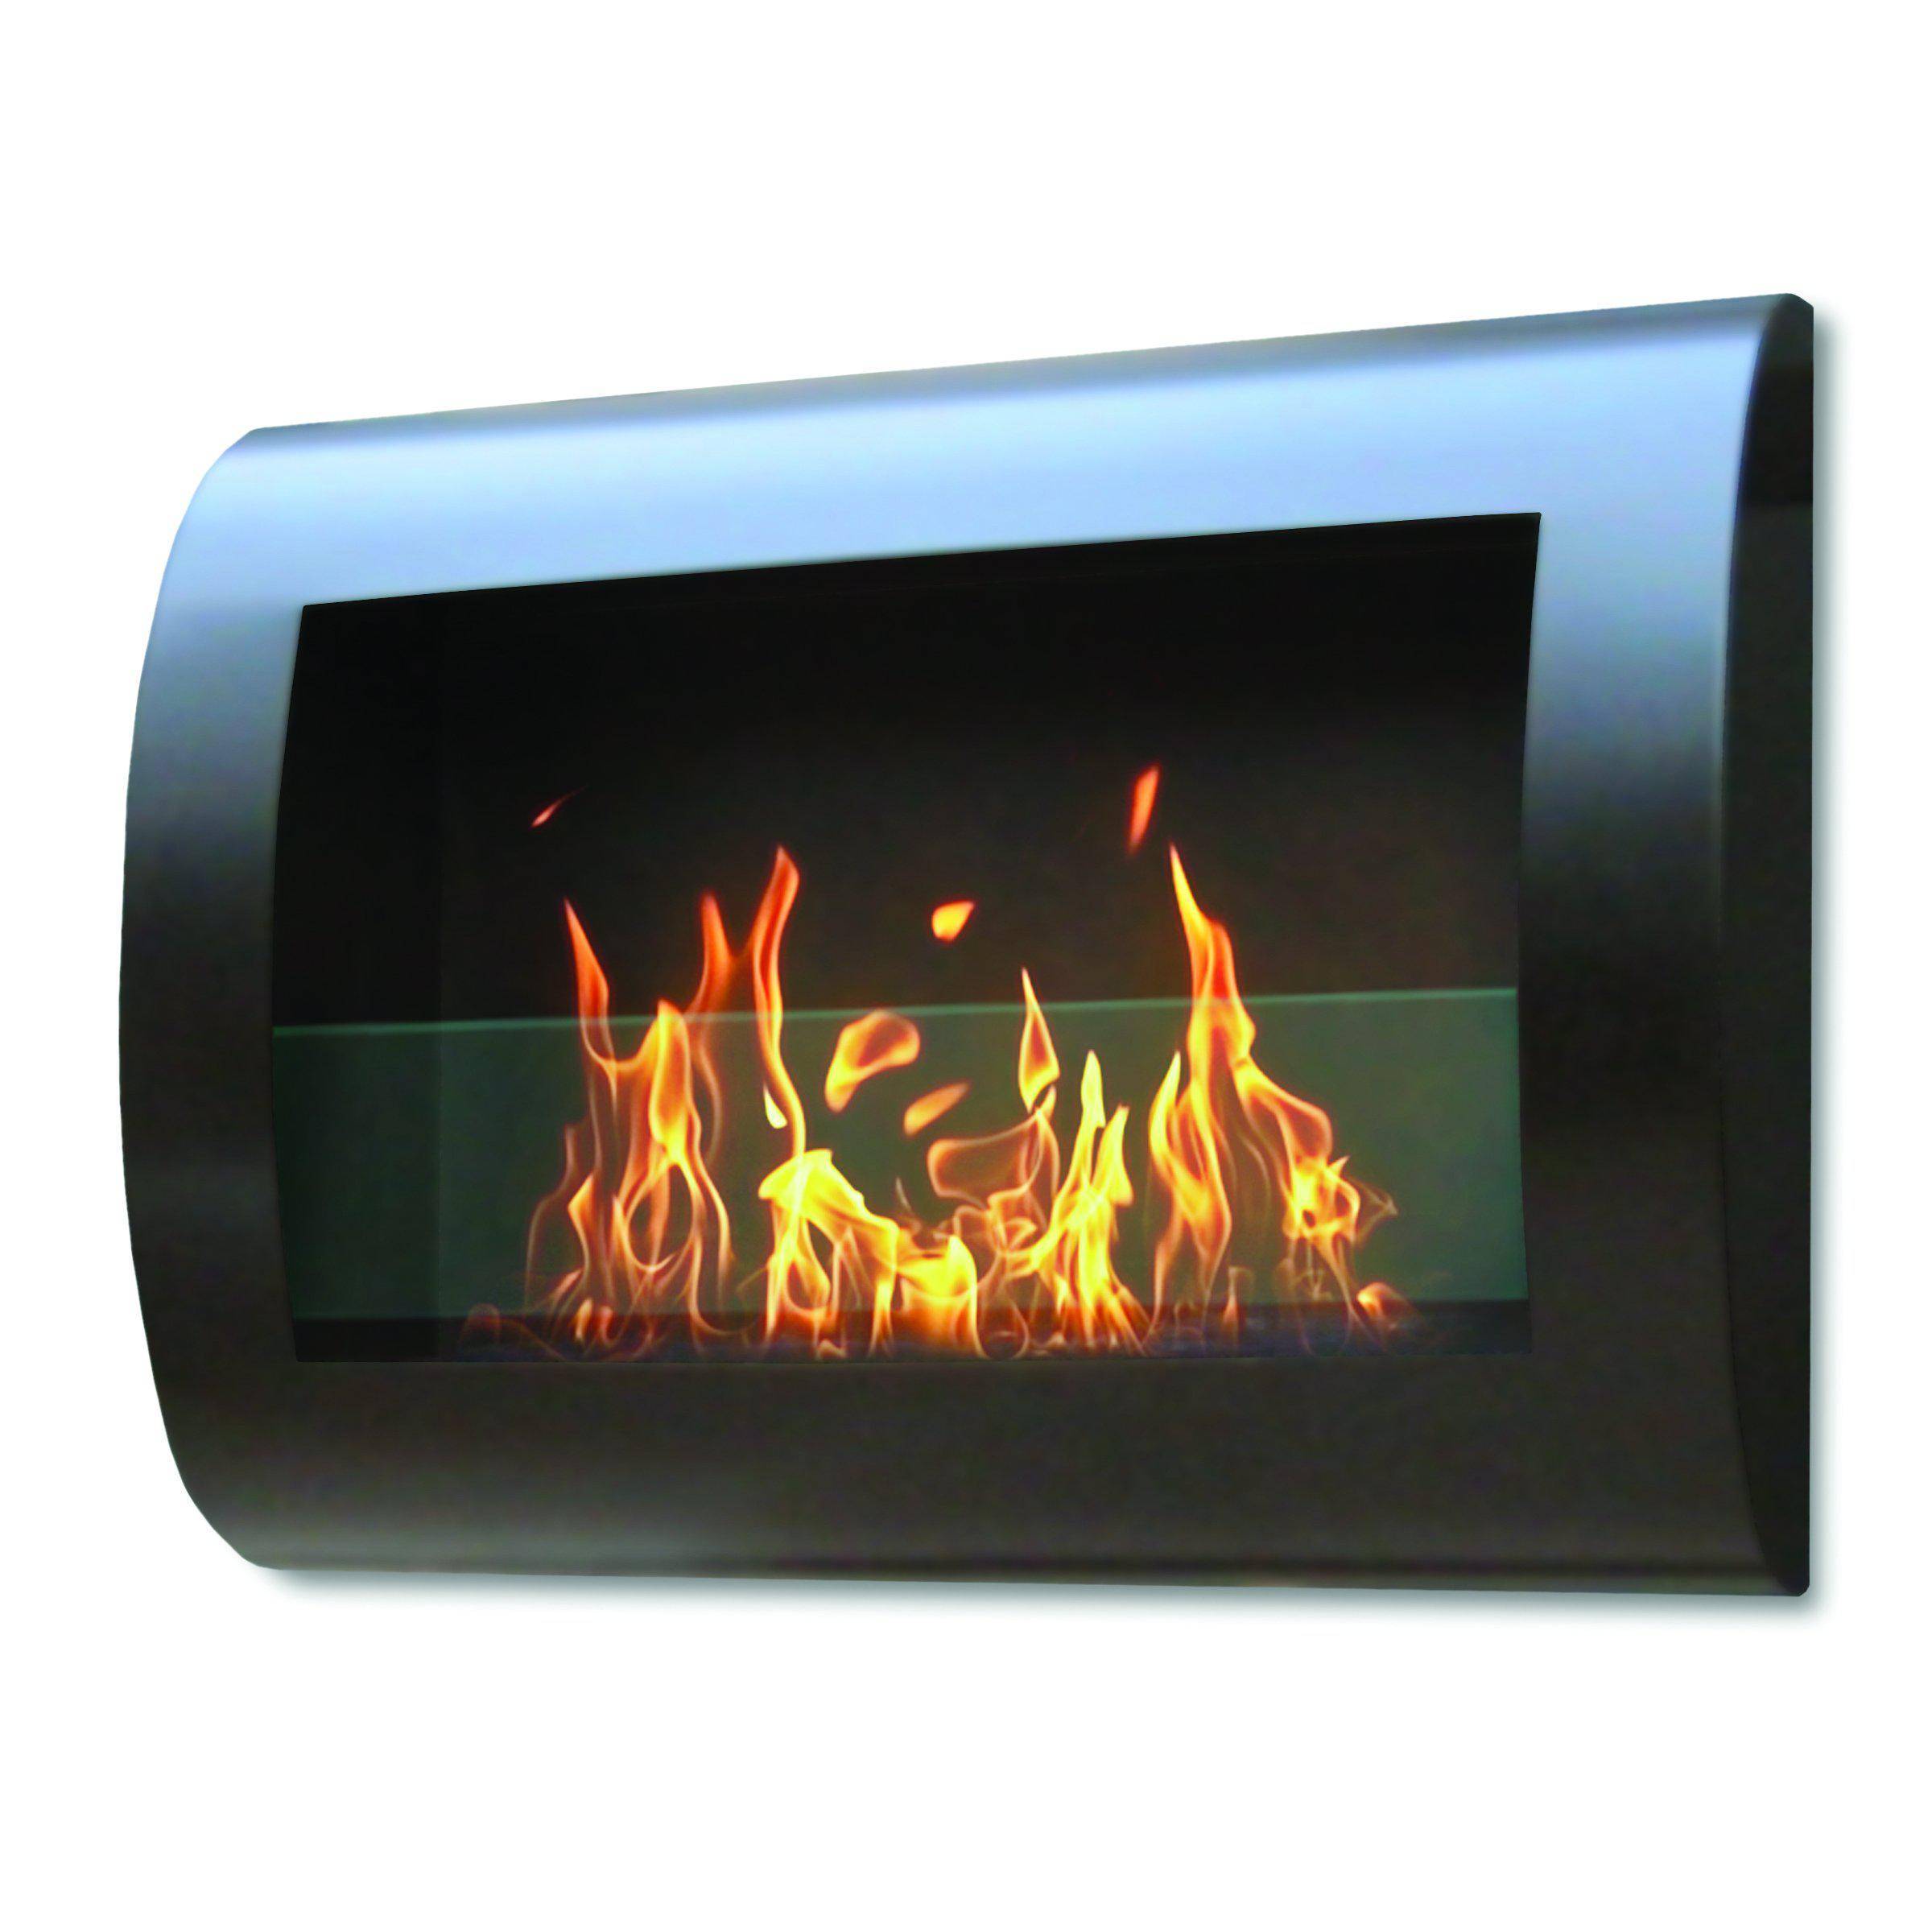 Anywhere Fireplace Chelsea Wall Mounted Ethanol Fireplace-Modern Ethanol Fireplaces